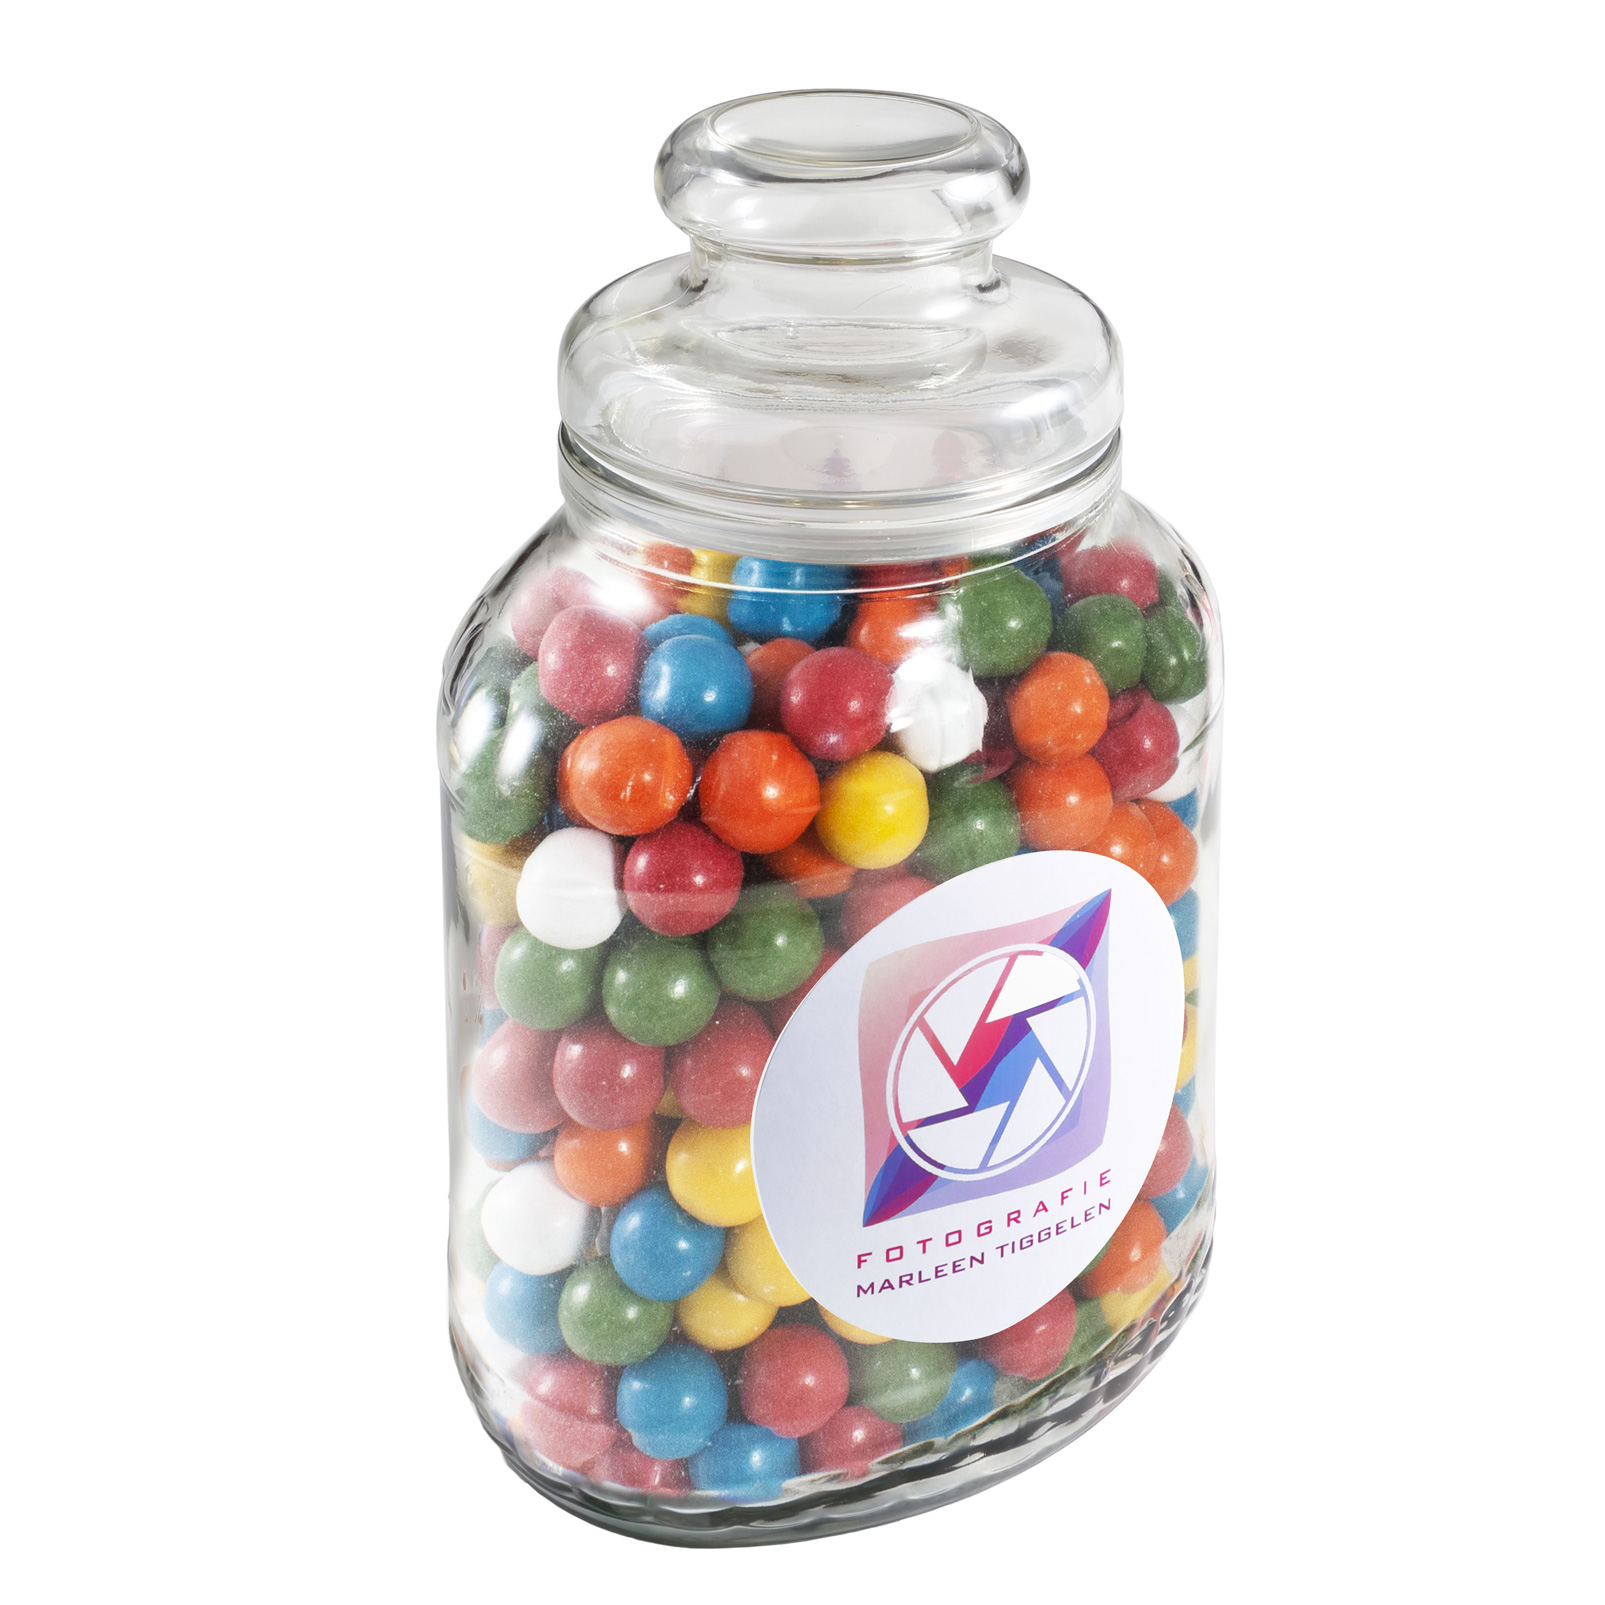 Large Classic Glass Jar with Metallic Sweets and Silver Lid - Belgrave